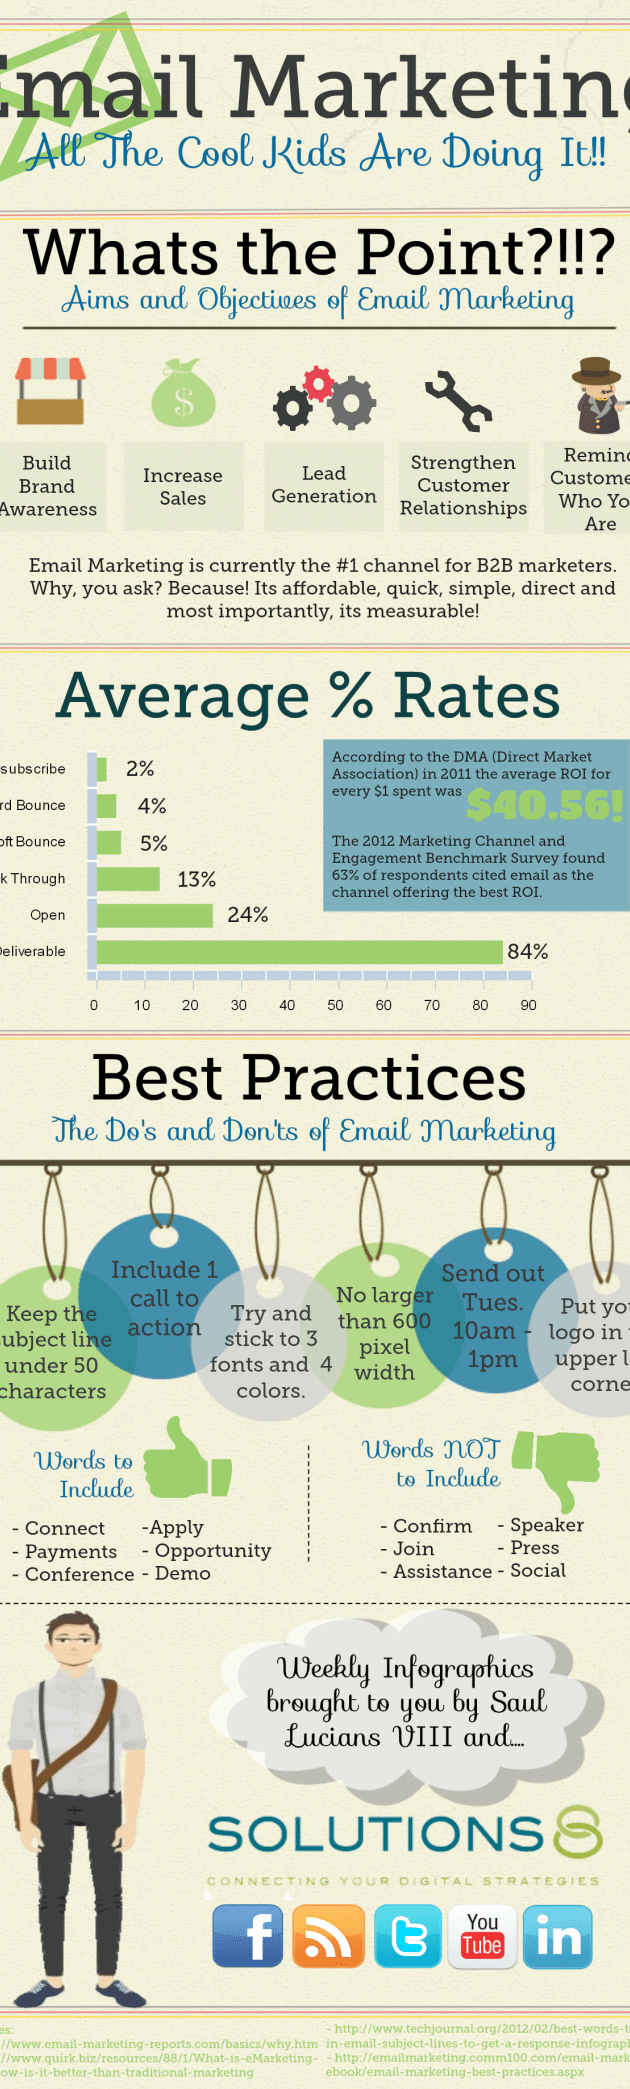 Email Marketing Infographic - Solutions 8